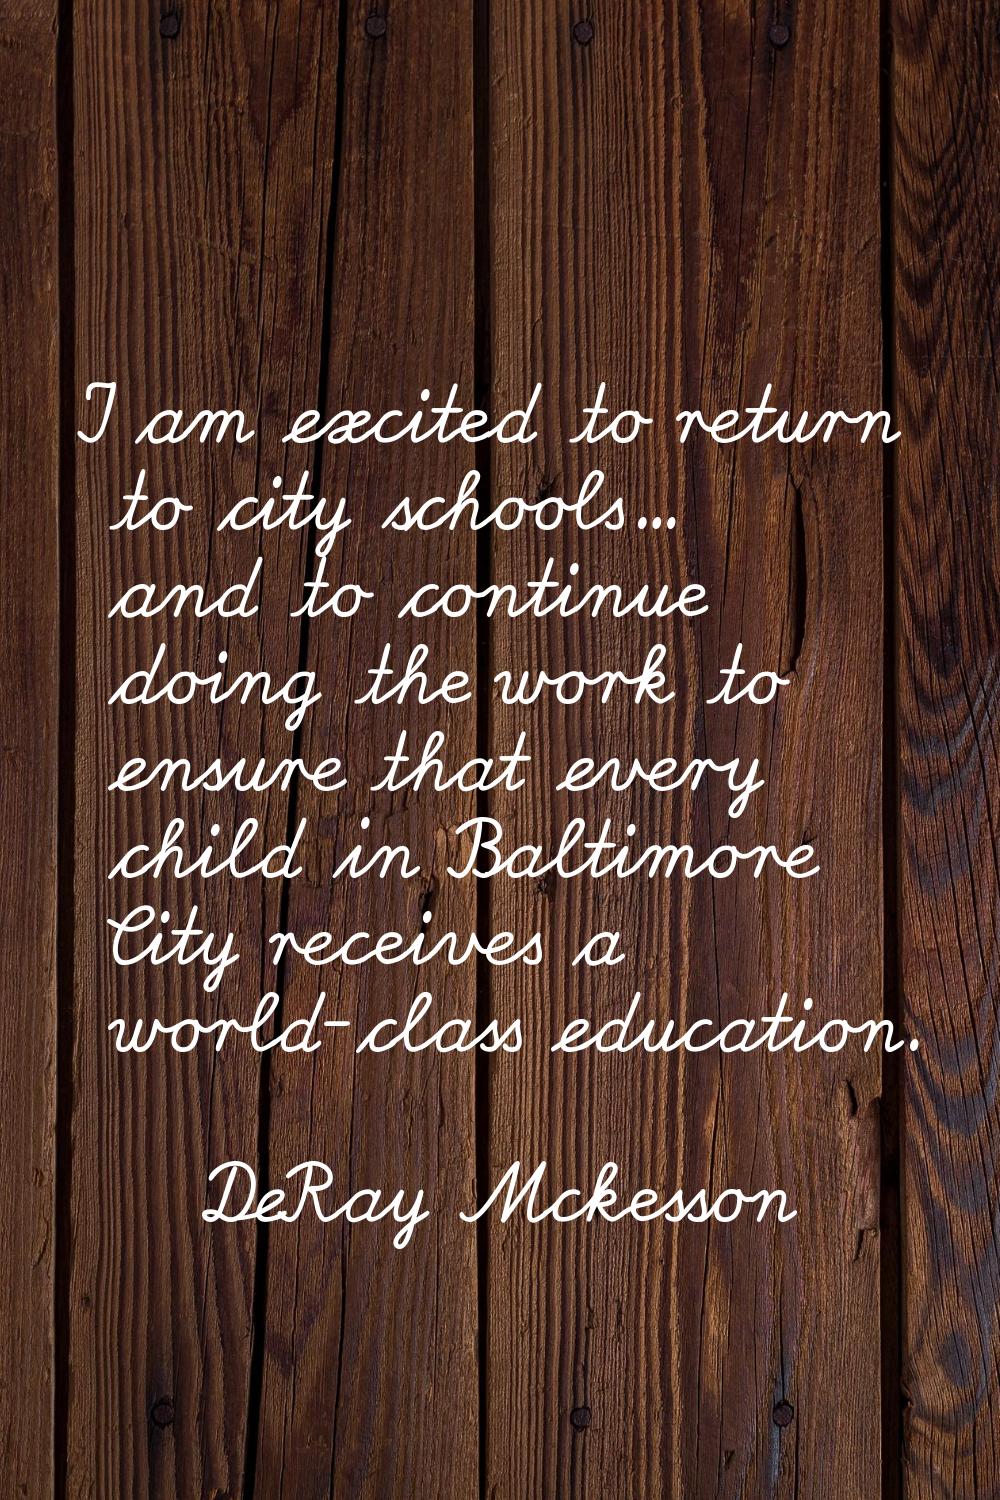 I am excited to return to city schools... and to continue doing the work to ensure that every child